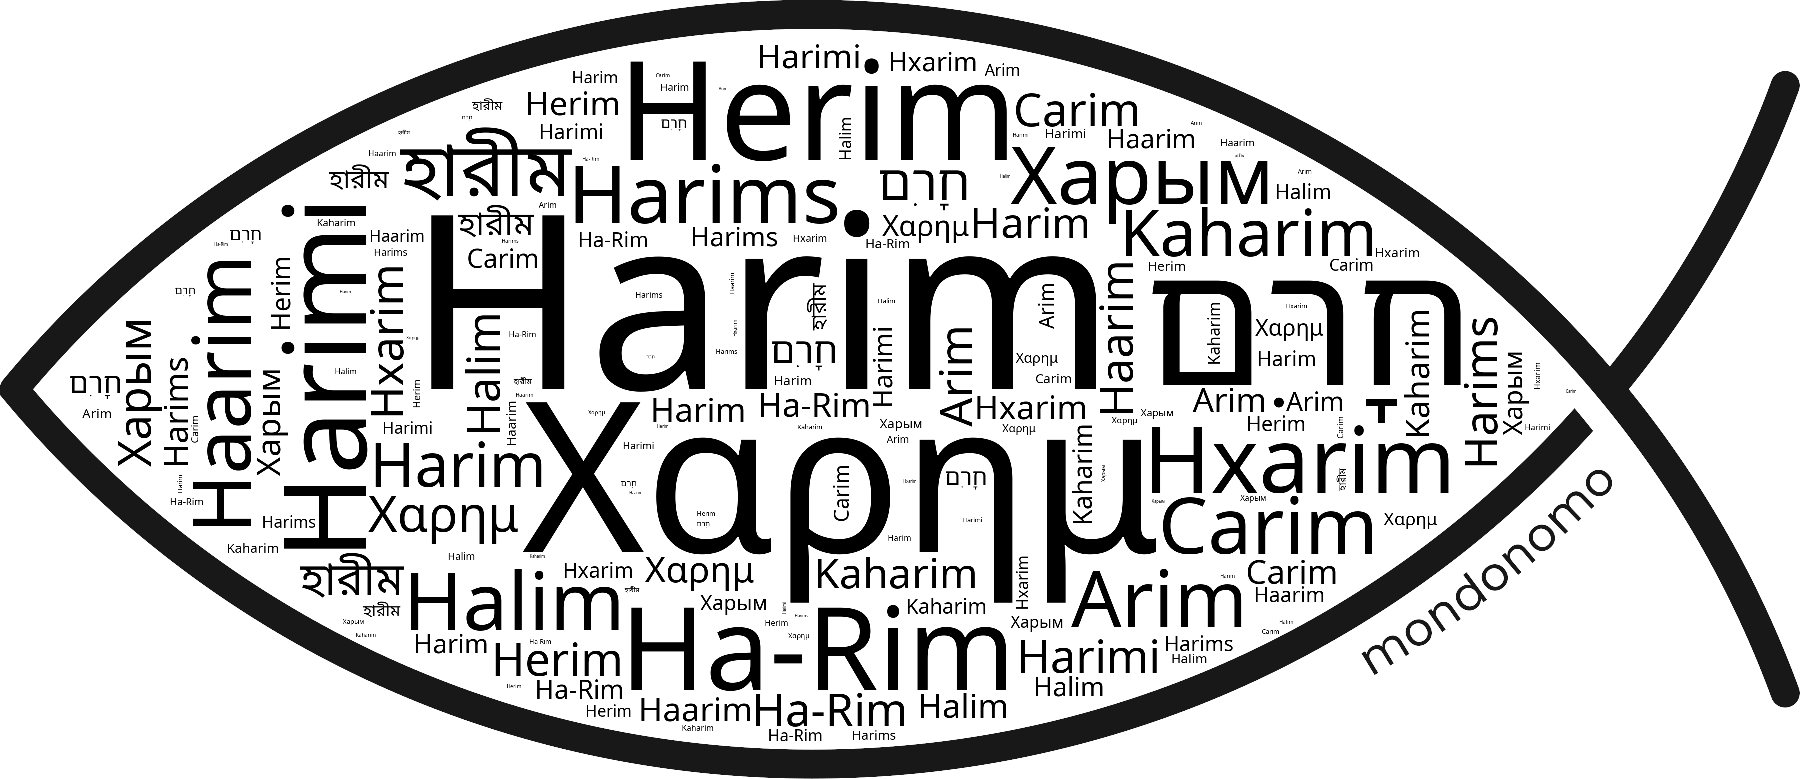 Name Harim in the world's Bibles